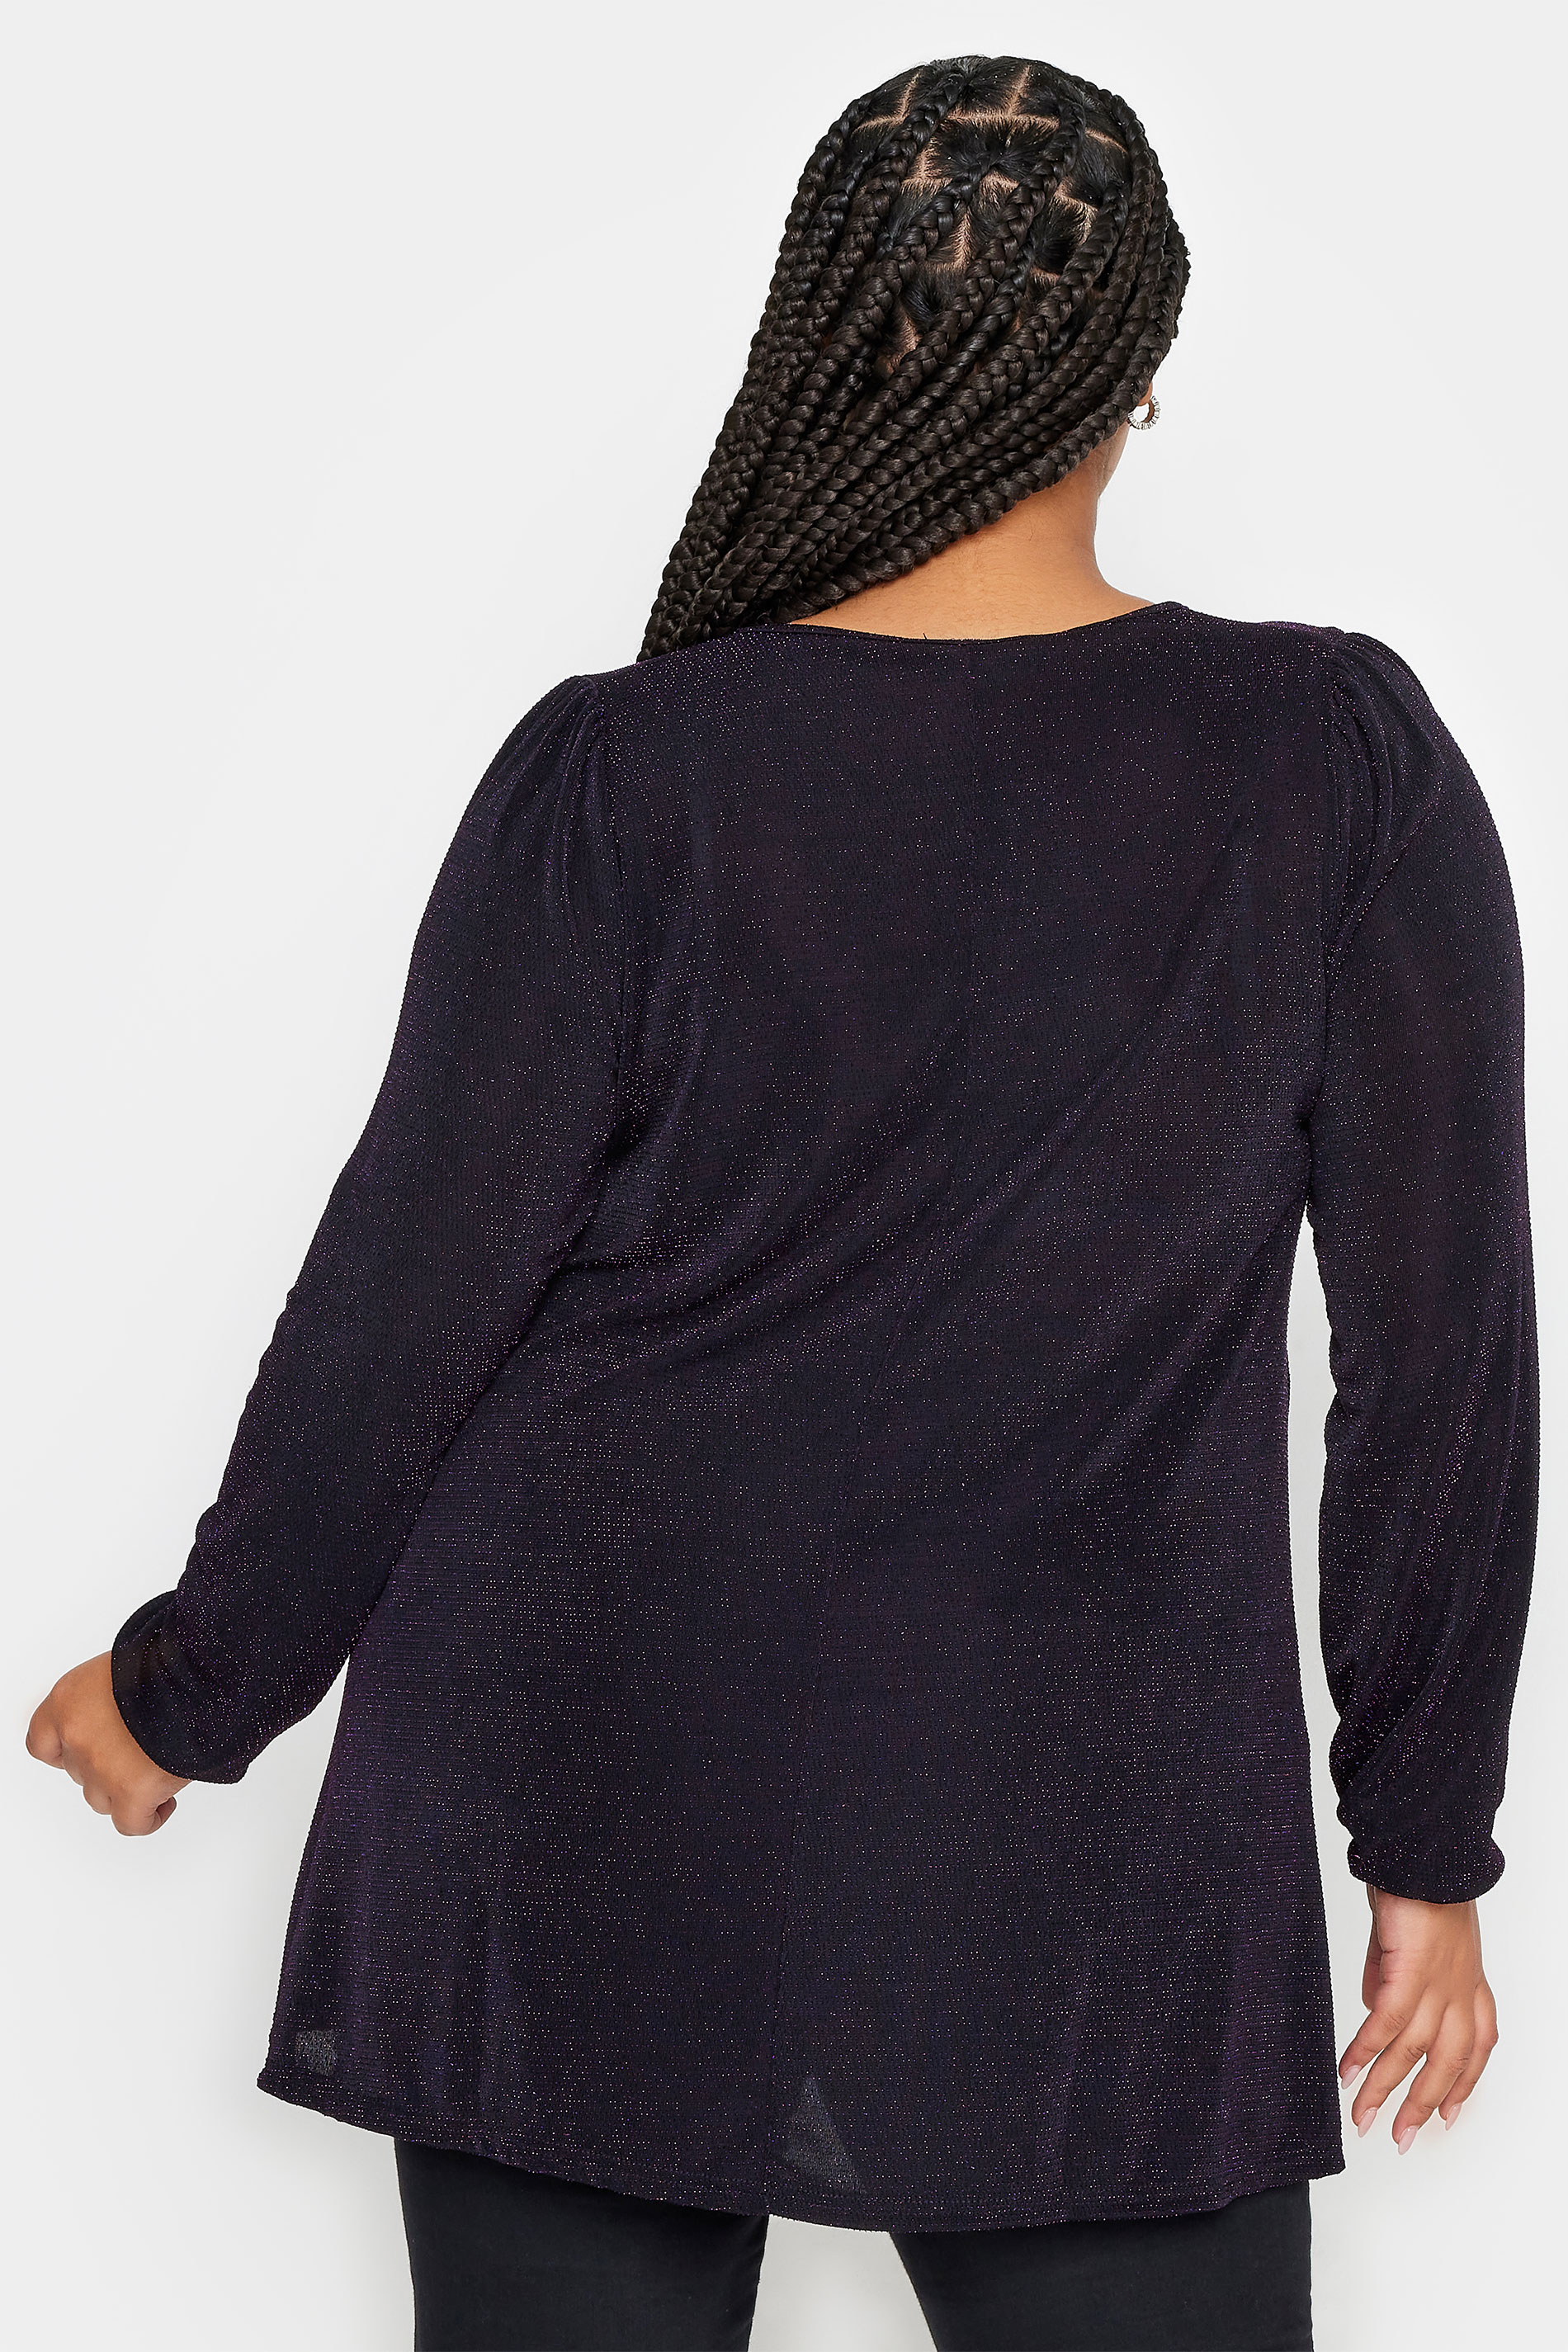 YOURS Curve Purple Balloon Sleeve Top | Yours Clothing  3